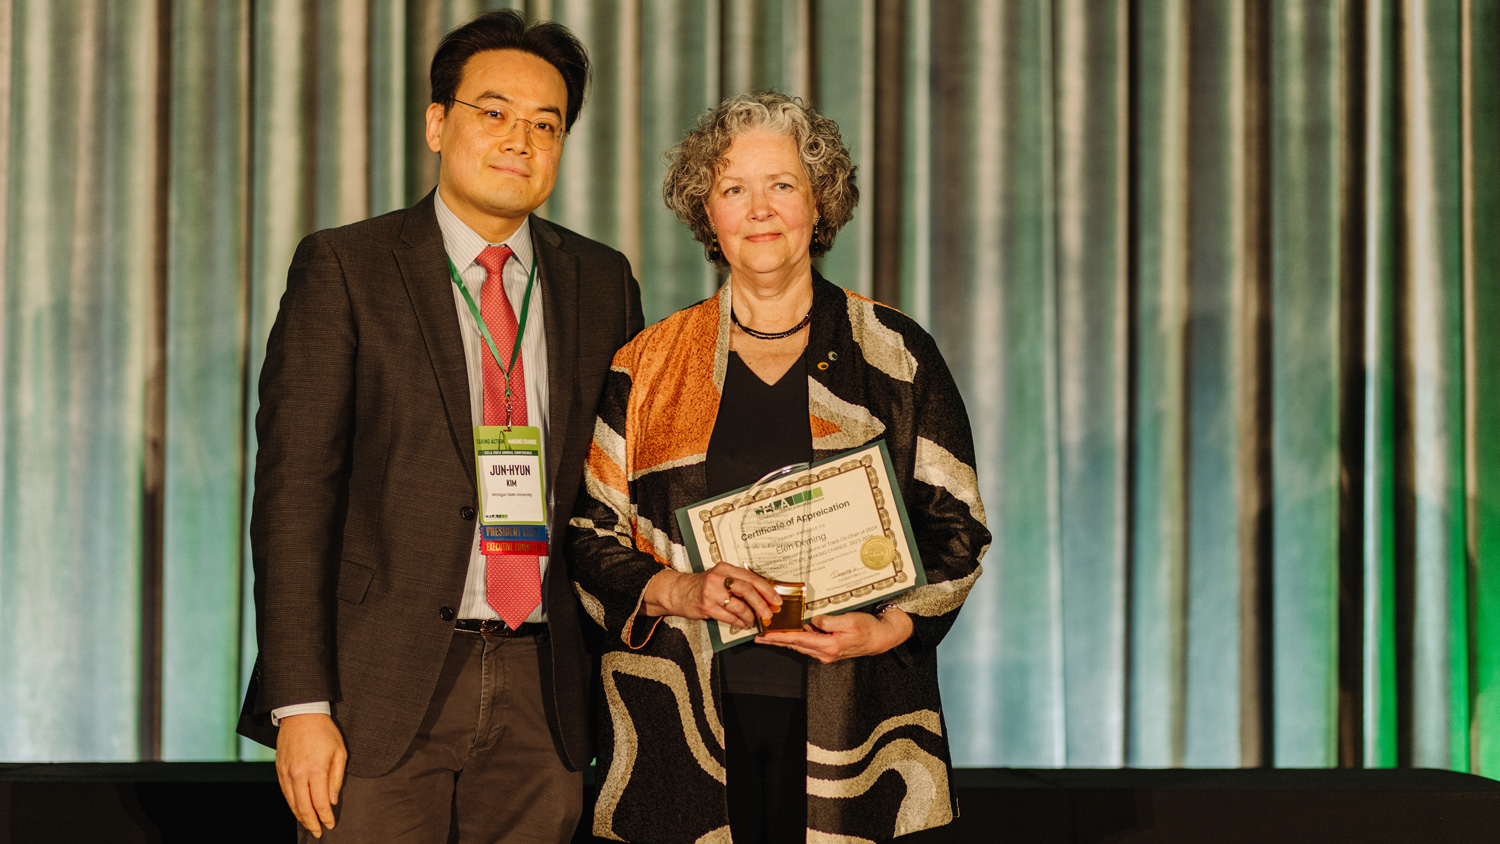 M. Elen Deming receives Forster Ndubisi Professional Service Award at the Council of Educators in Landscape Architecture (CELA) from incoming president Dr. Jun-Hyun Kim. Photo credit: CELA/Dongying Li.